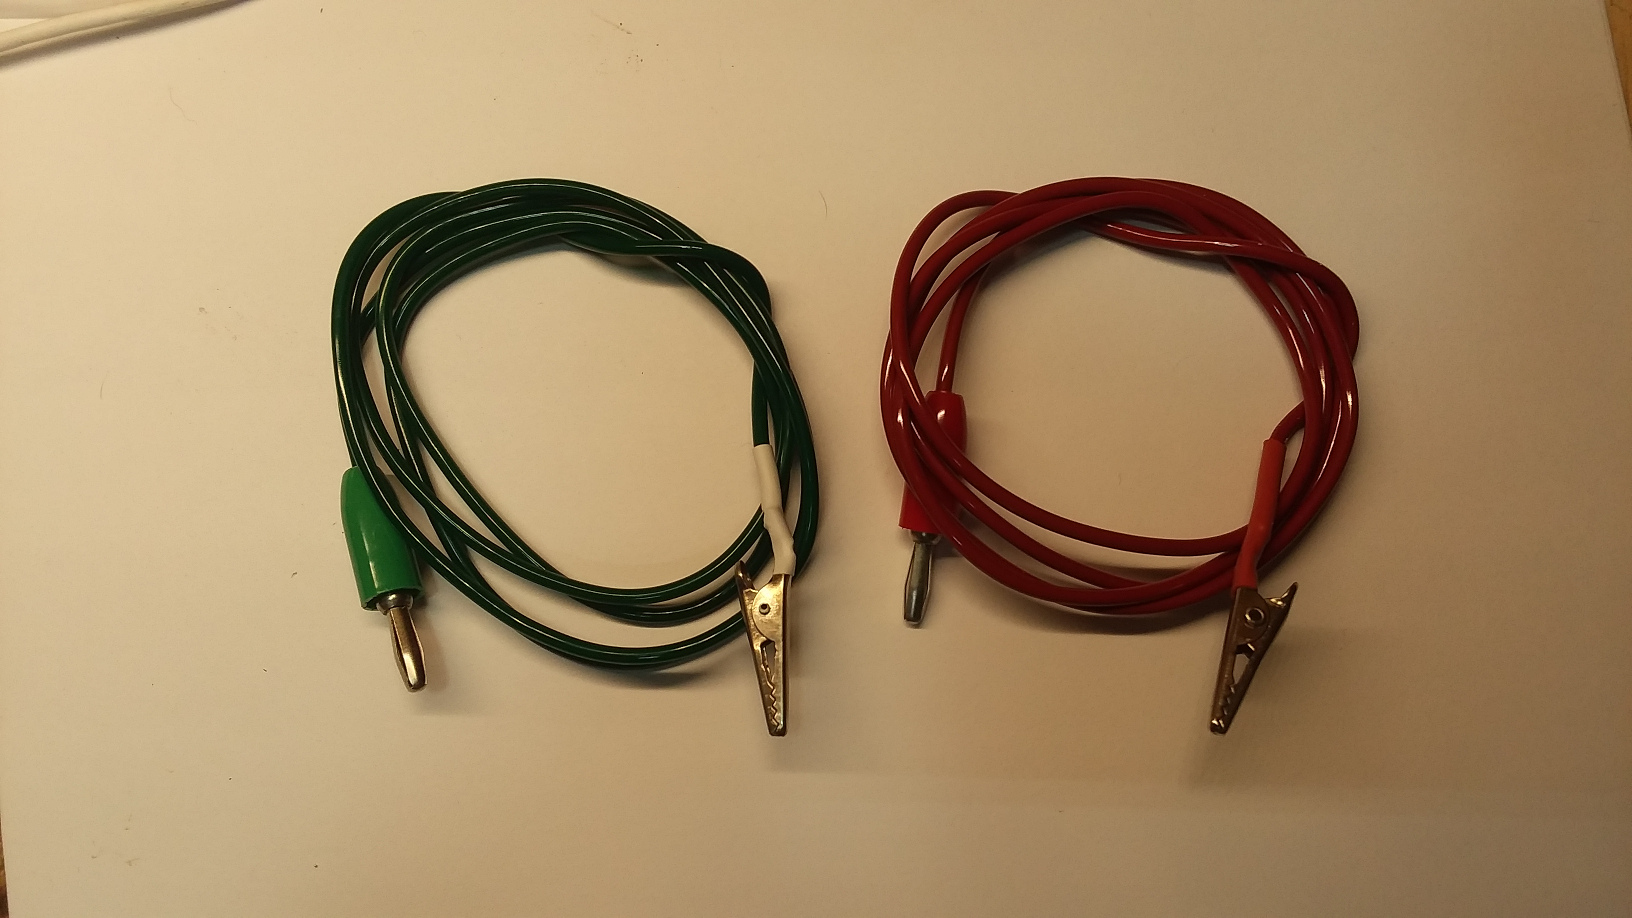 Alligator clip type wires, 39 inches long